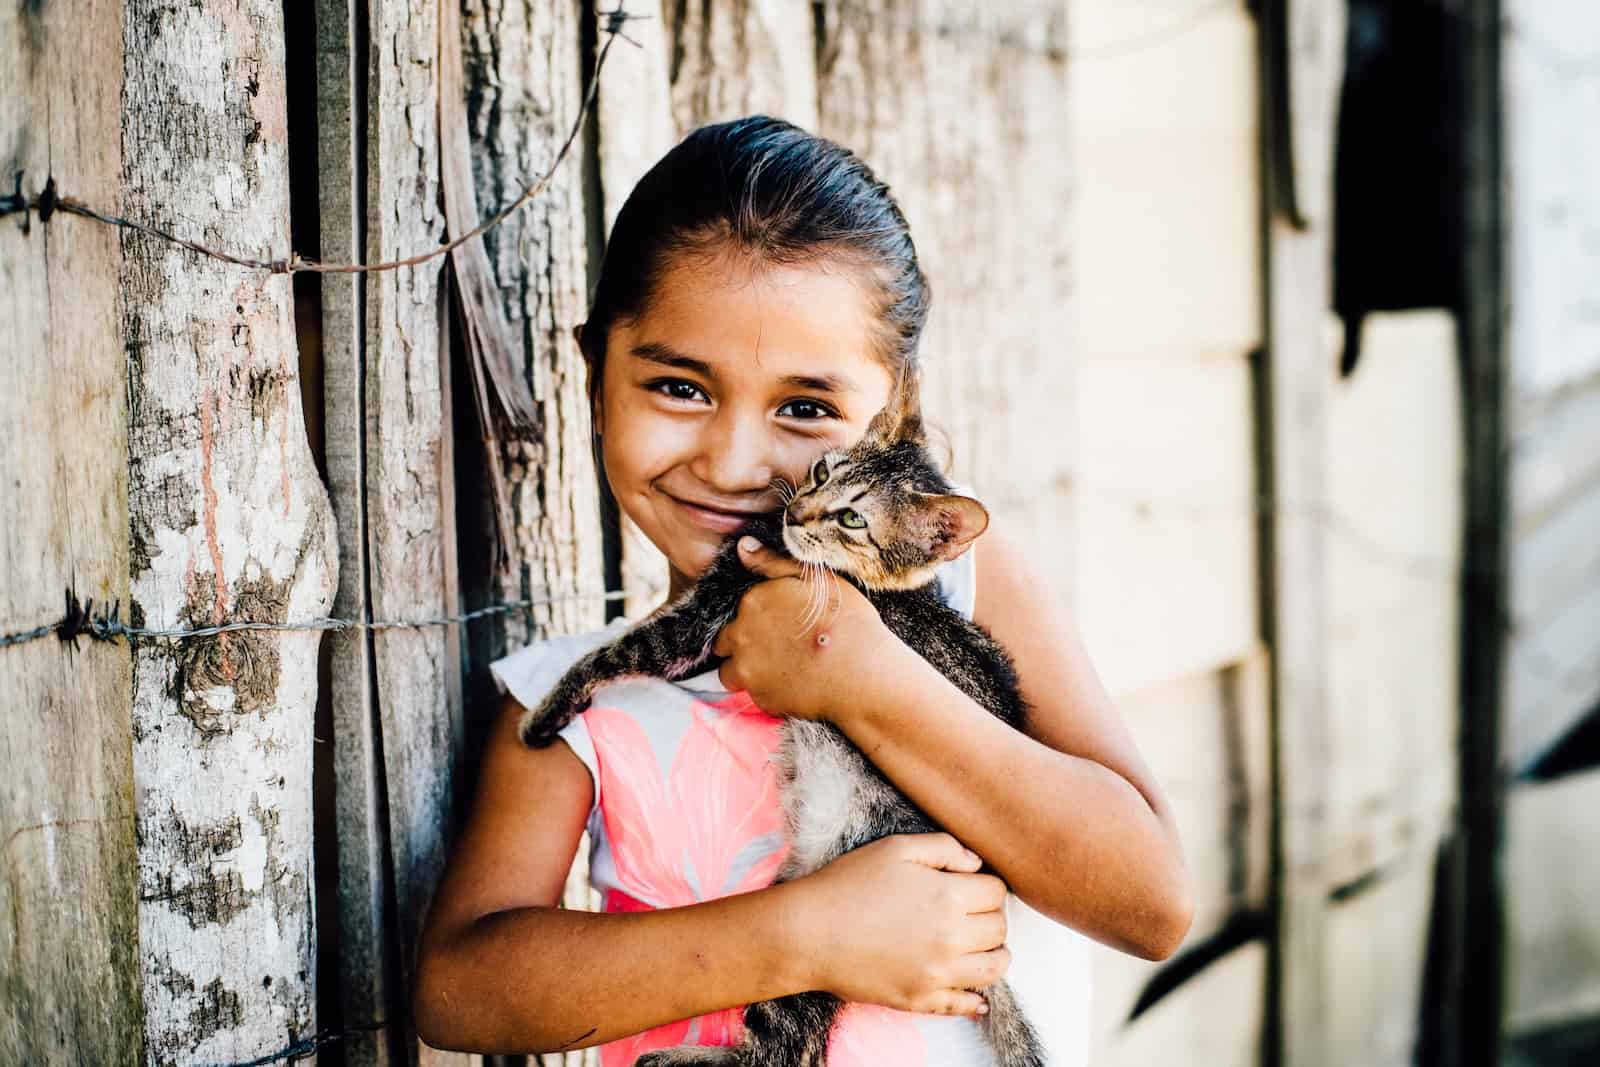 A young girl wearing a white T-shirt cuddles a kitten in front of a wooden fence.